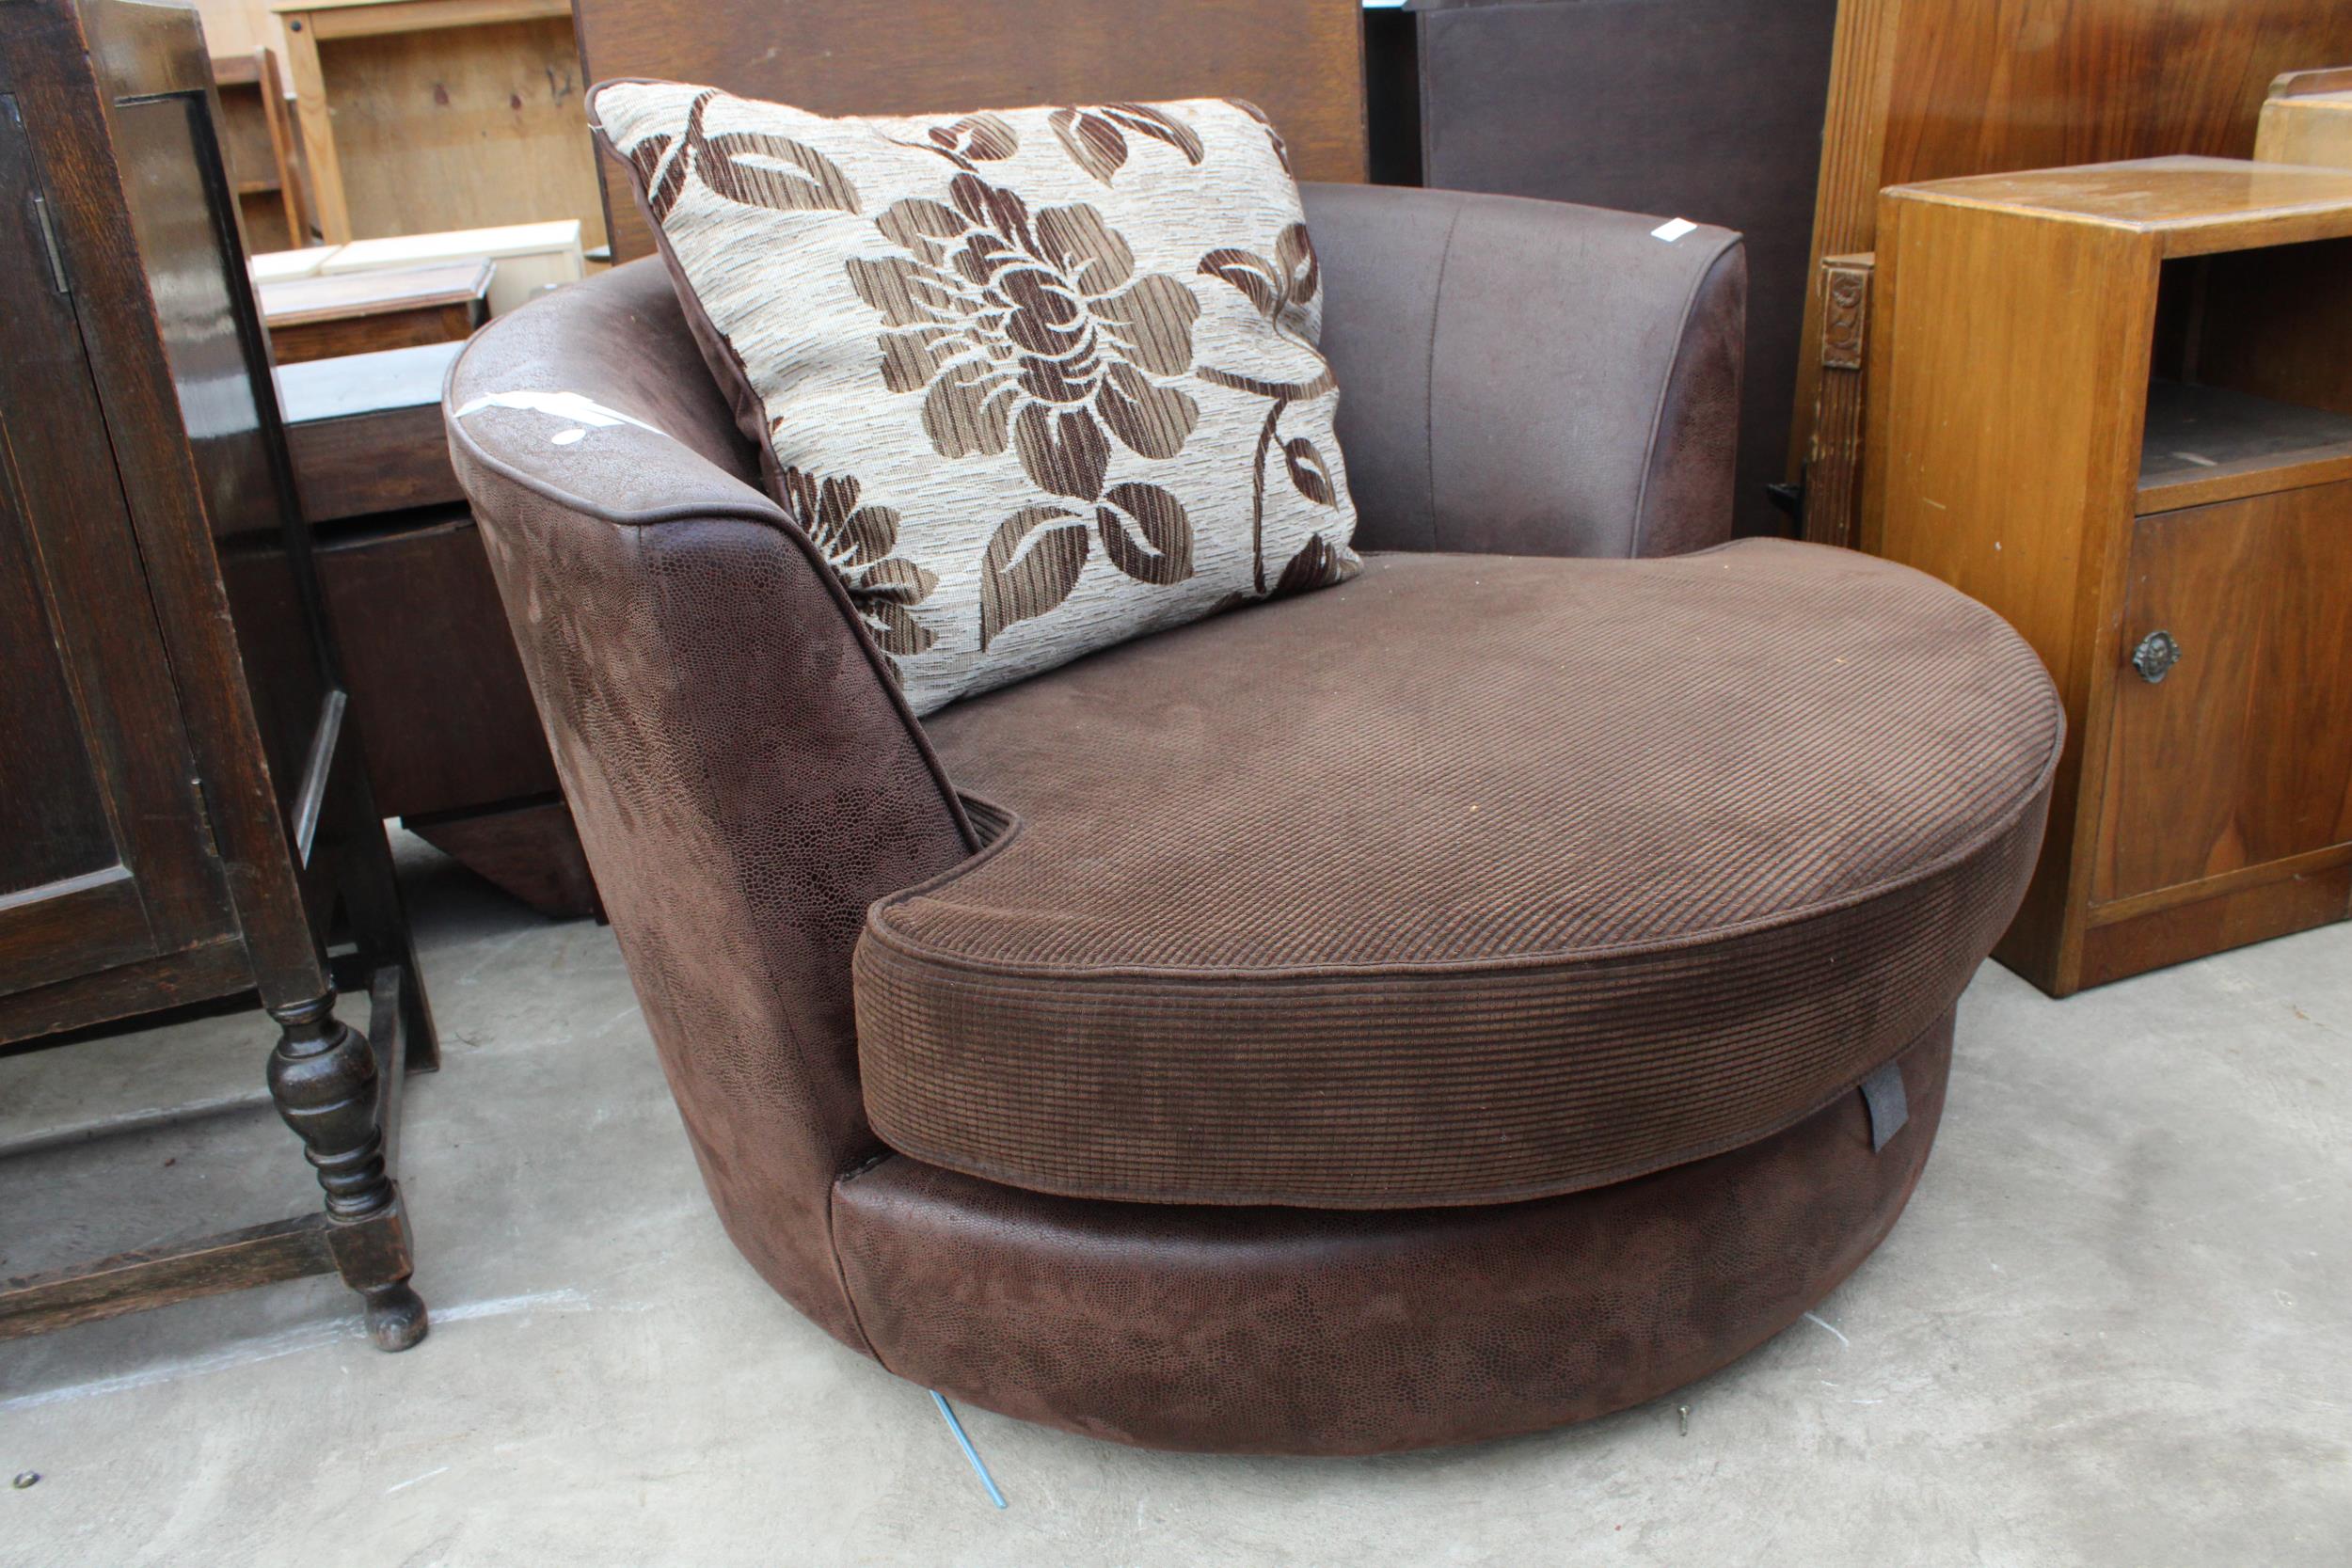 A BROWN LAURA ASHLEY SWIVEL SNUGGLE CHAIR - Image 2 of 3